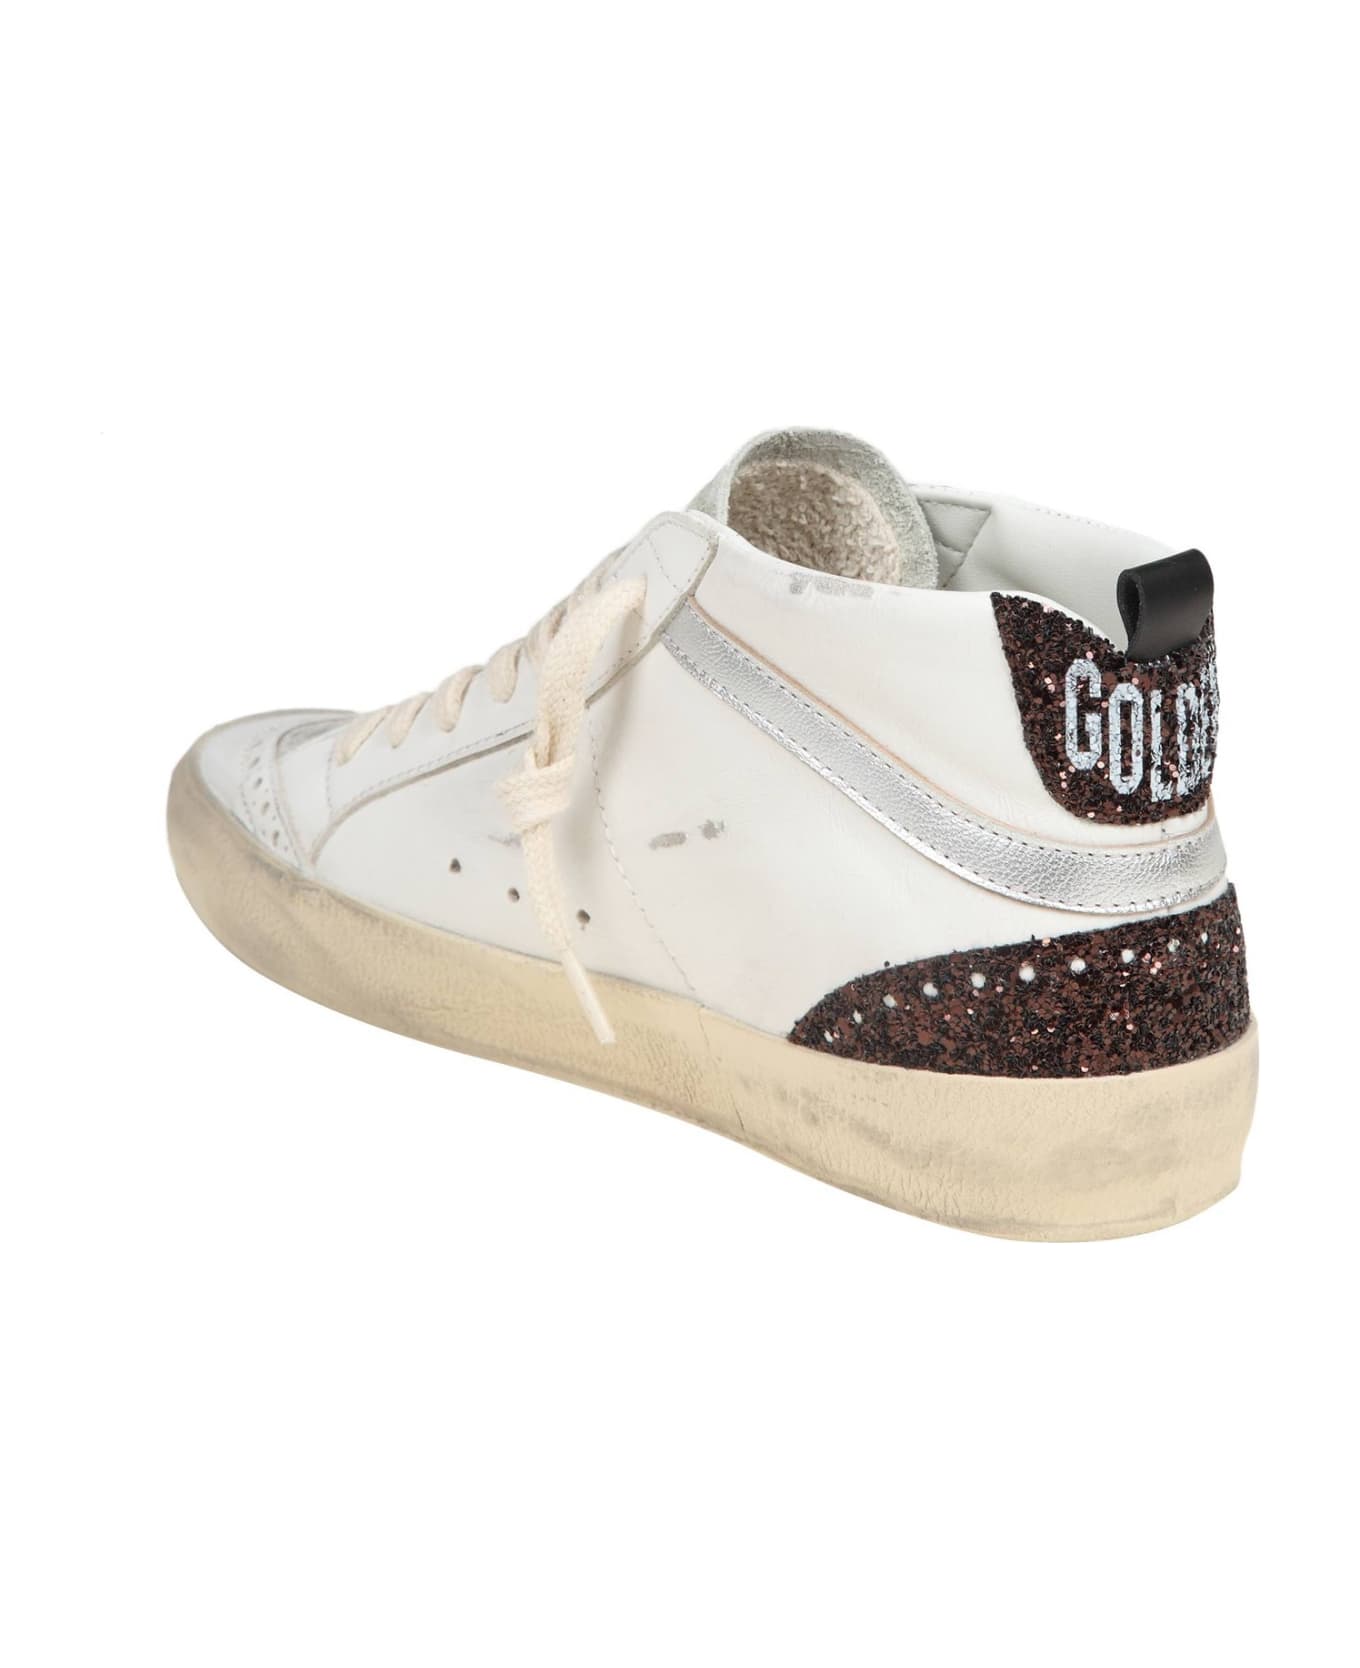 Golden Goose Mid Star In Leather And Suede With Glitter Star - White/Gold